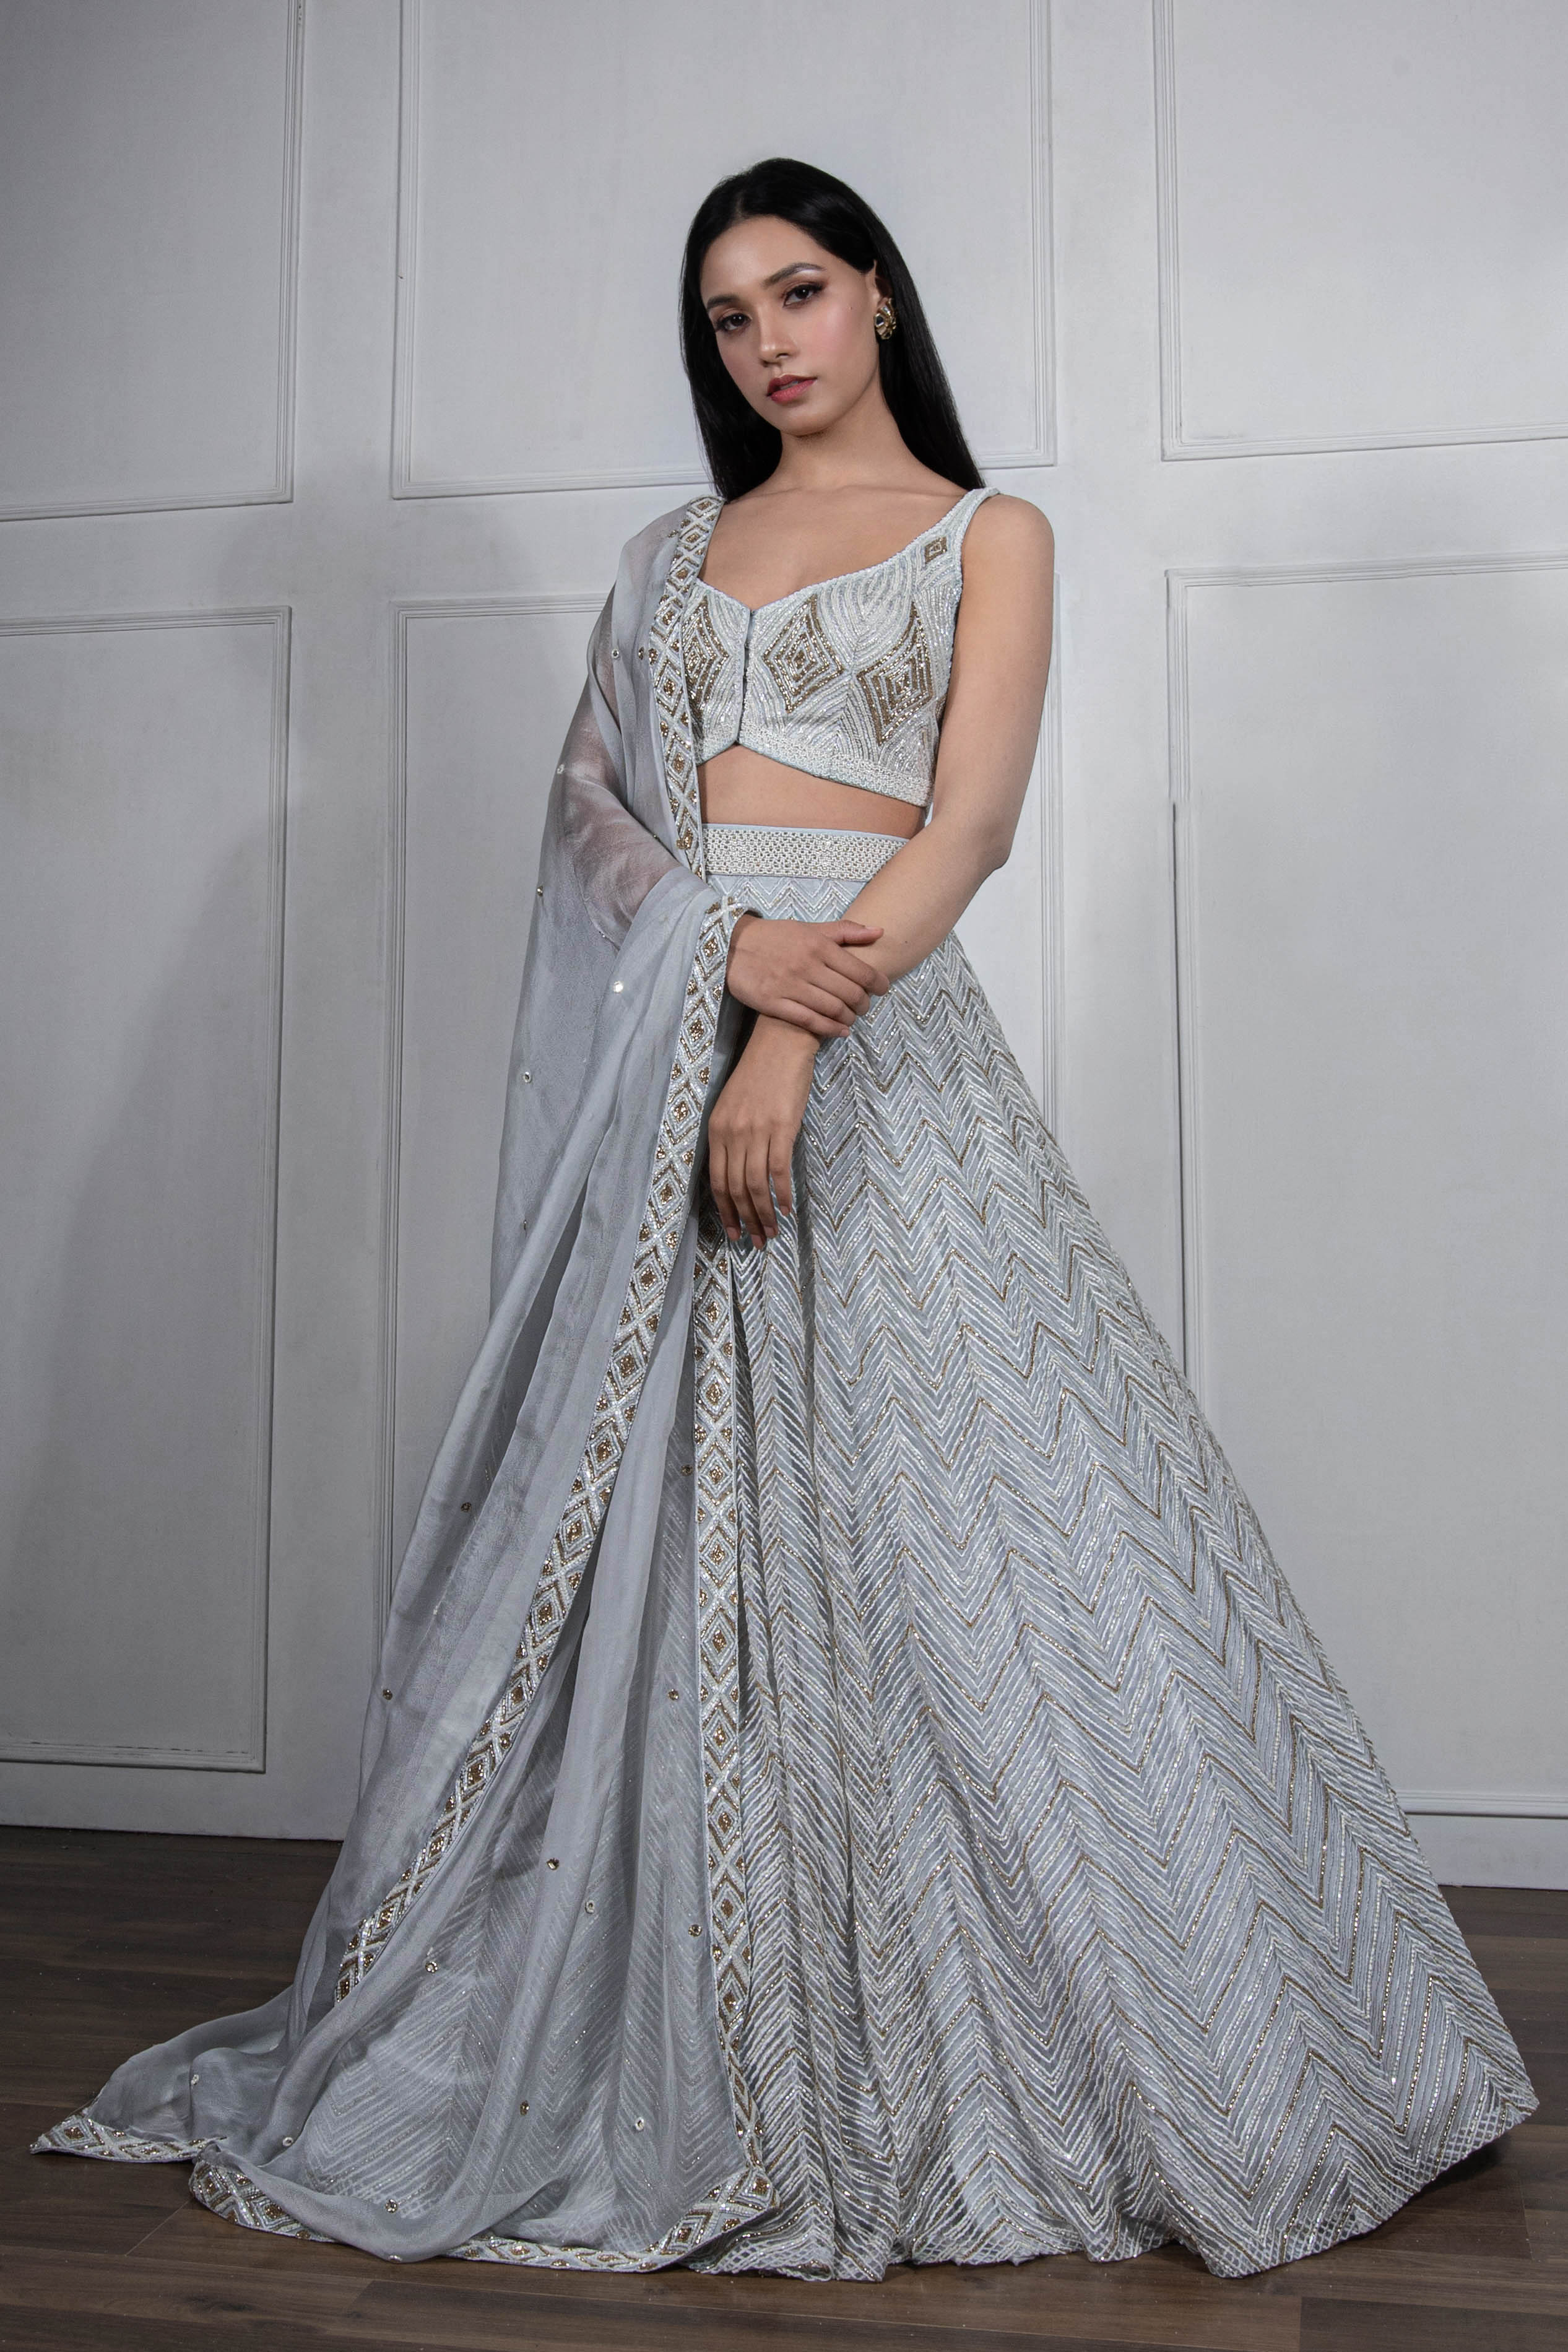 Champagne and ivory lehenga with tube blouse by Ridhi Mehra